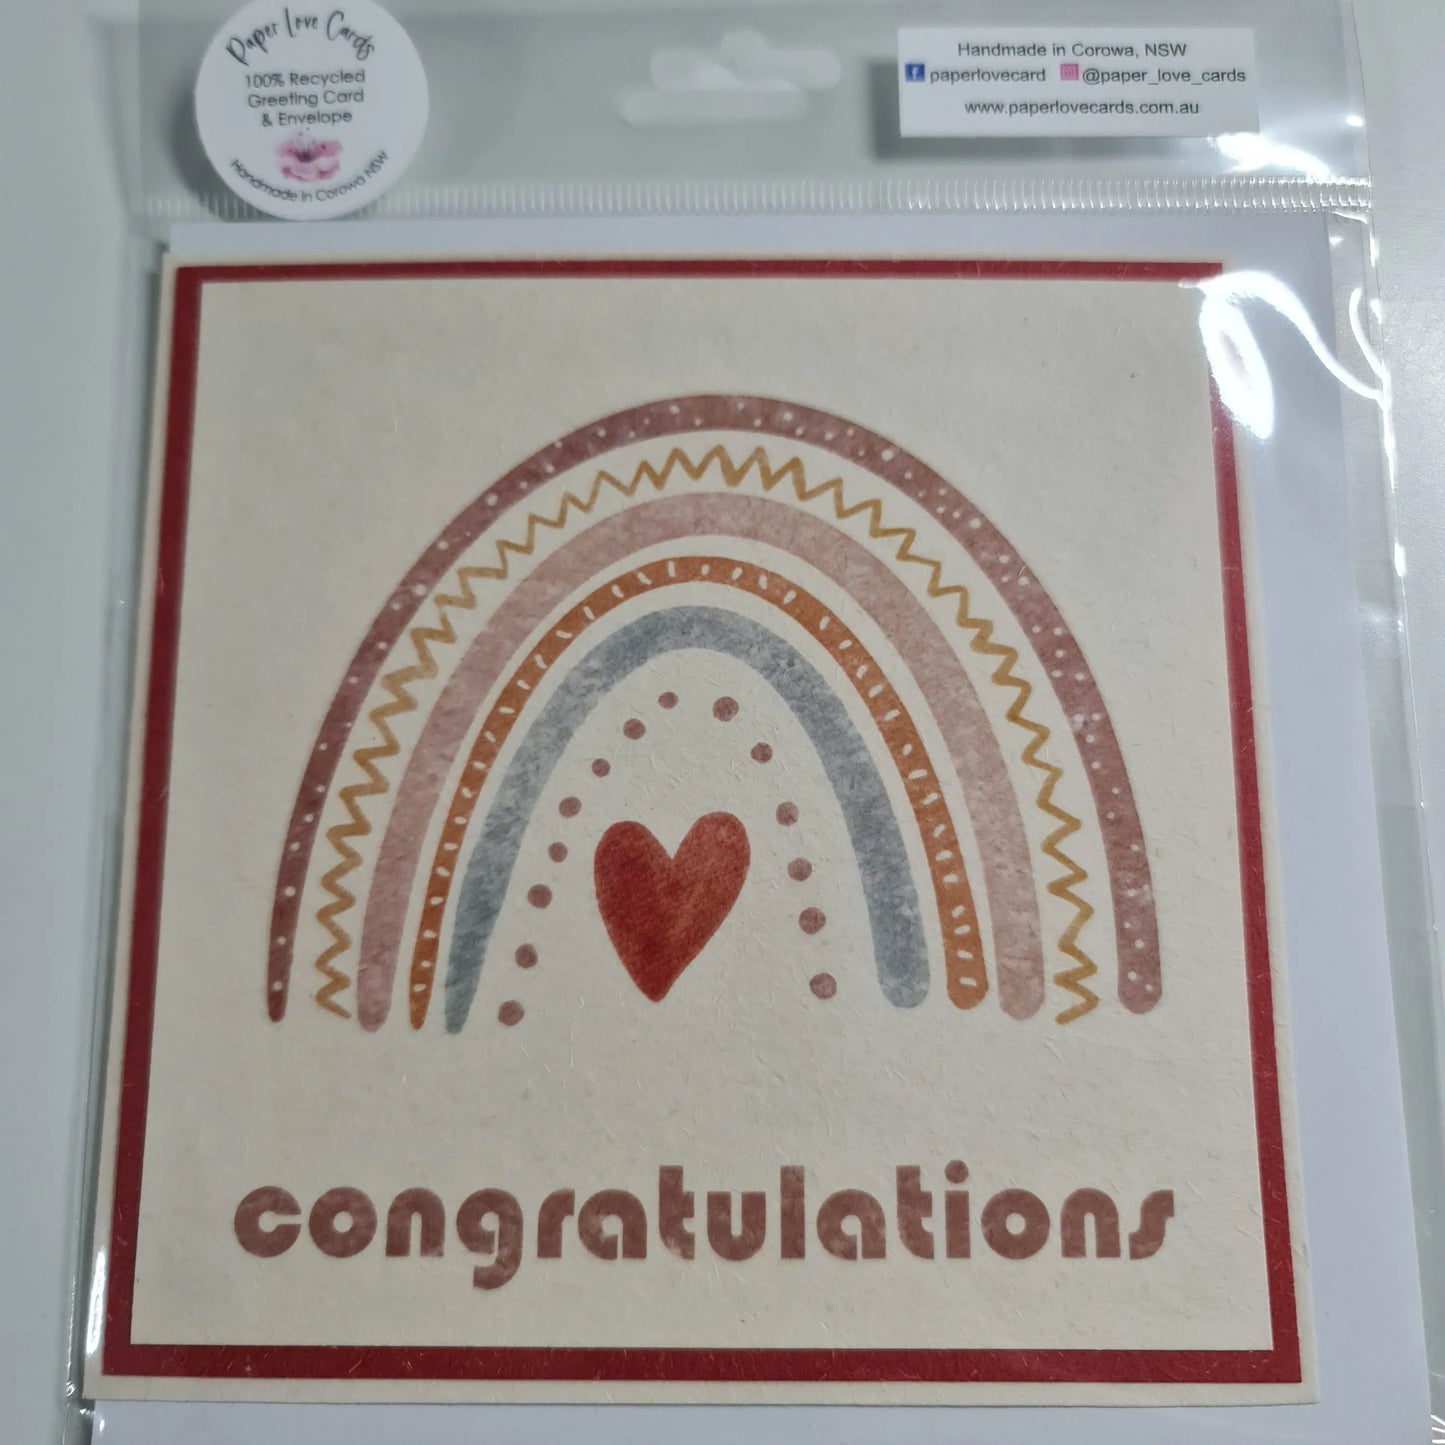 Congratulations Rainbow - Recycled Card Paper Love Cards